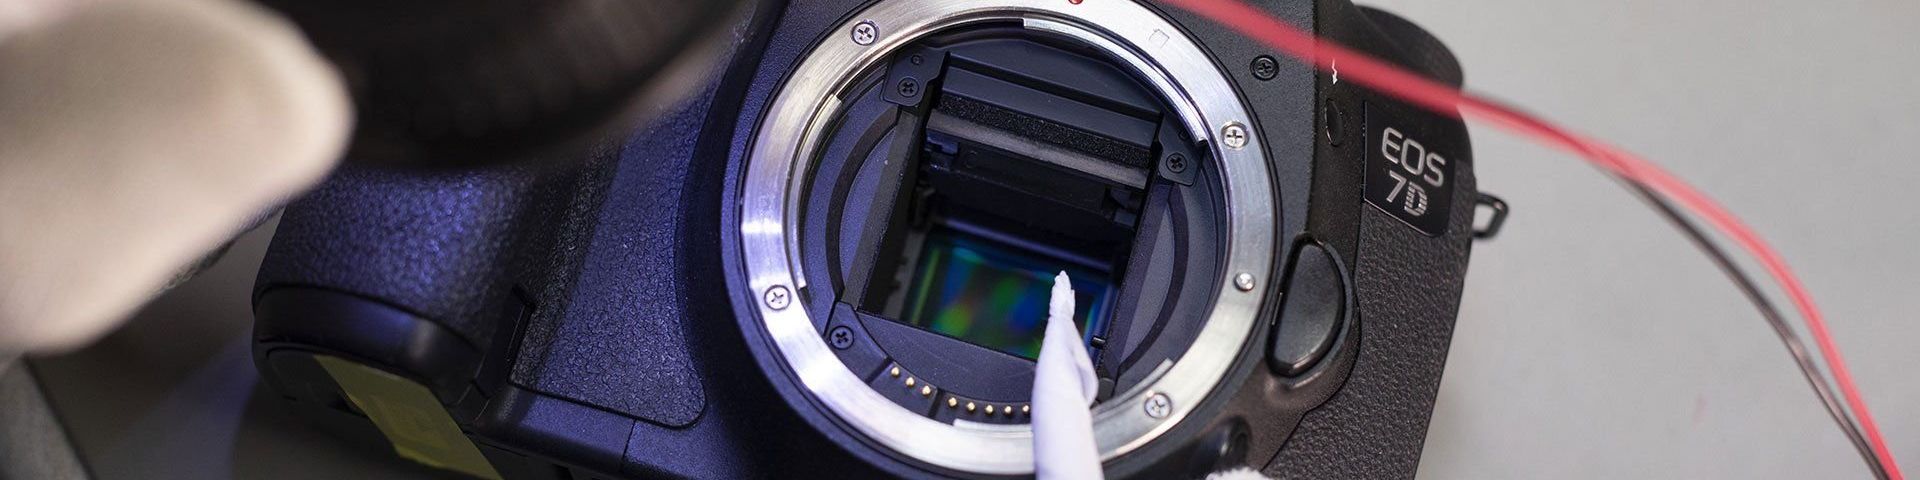 A close-up of a Canon EOS 7D body showing the sensor inside